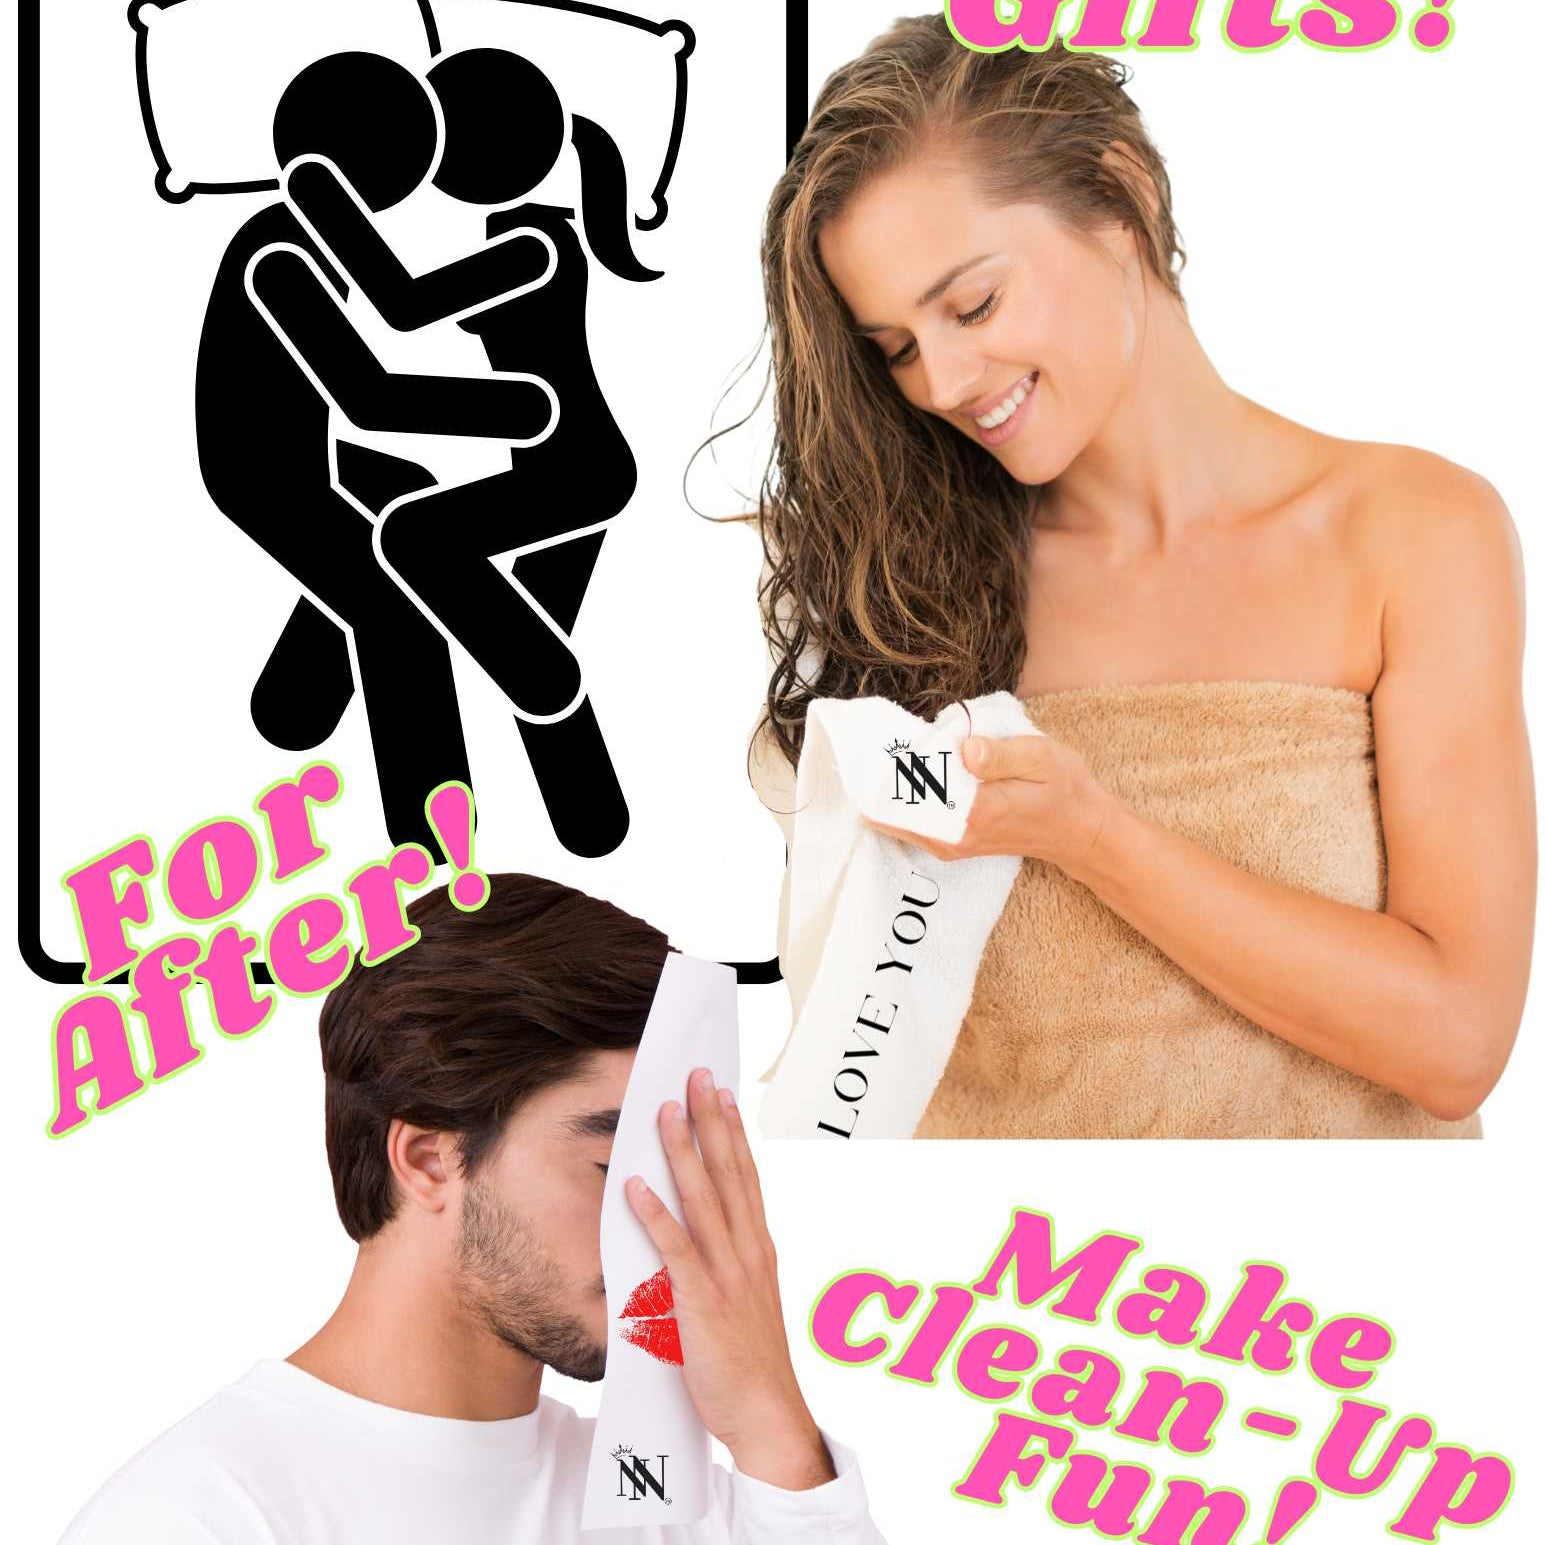 Beginner Cum Rag 2 | Gifts for Boyfriend, Funny Towel Romantic Gift for Wedding Couple Fiance First Year Anniversary Valentines, Party Gag Gifts, Joke Humor Cloth for Husband Men BF NECTAR NAPKINS